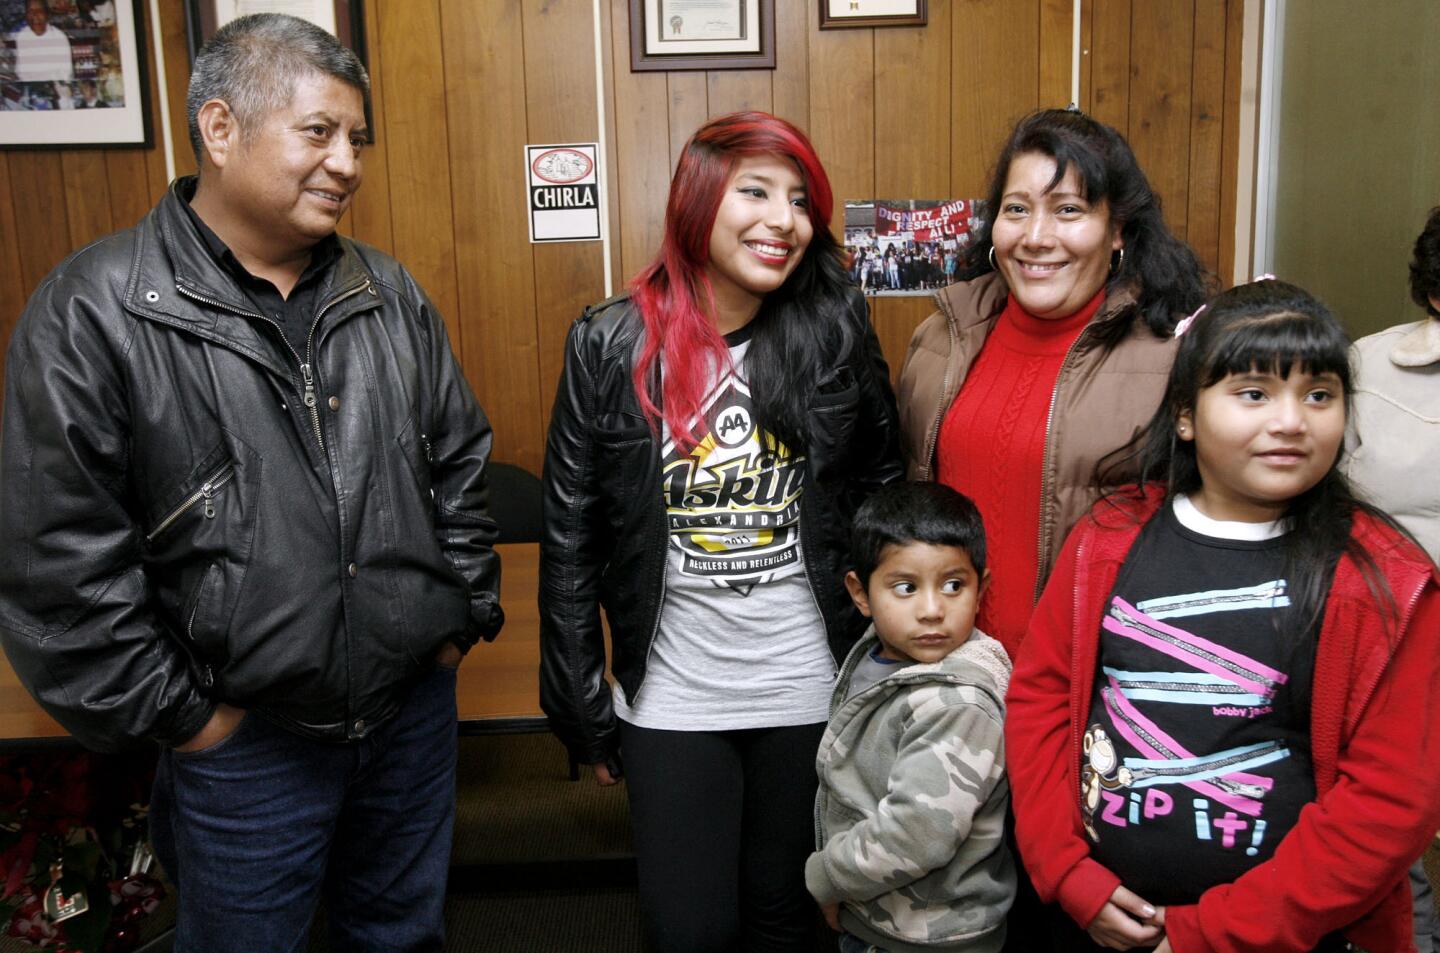 Photo Gallery: Deported Pasadena resident returned to US on humanitarian parole